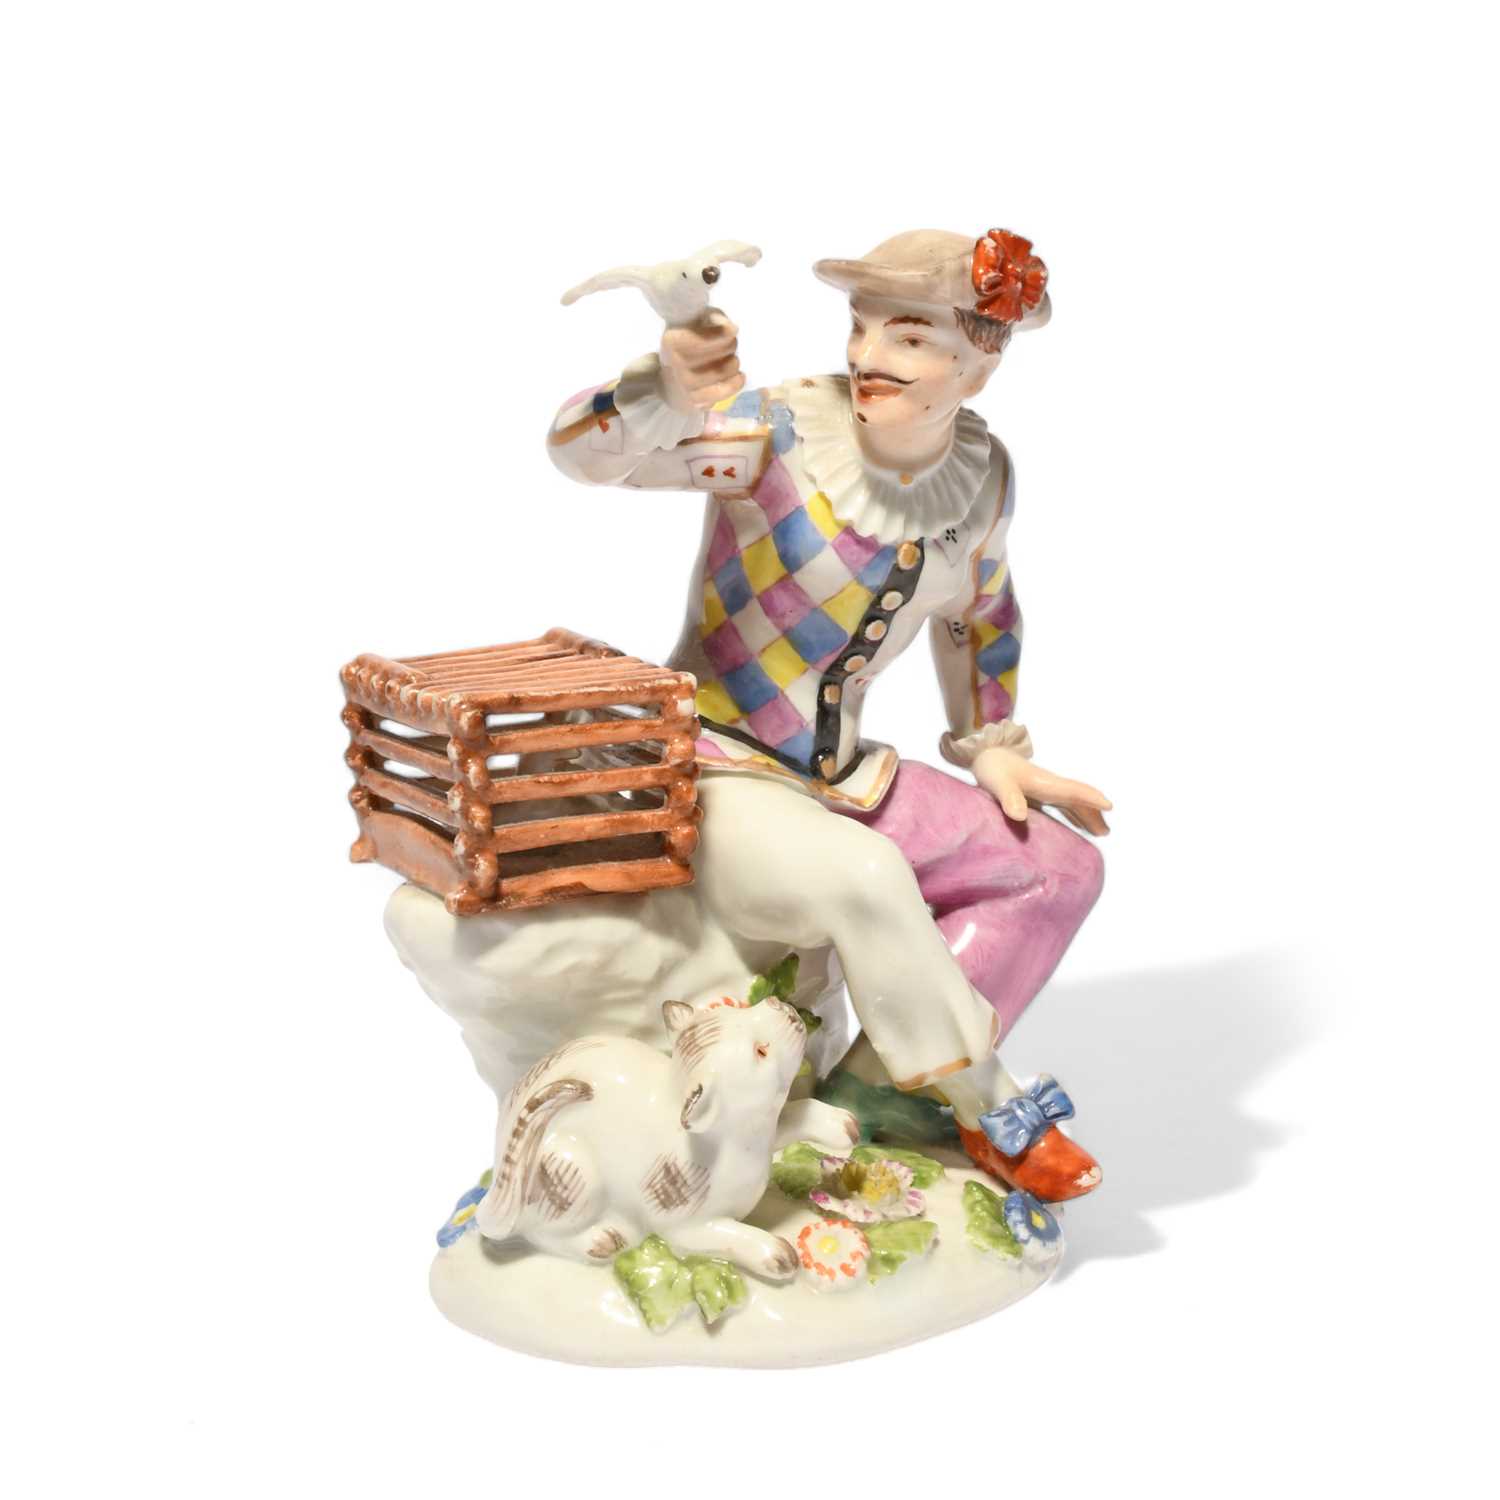 A Meissen figure of Harlequin, mid 18th century, modelled by J F Eberlein, seated and holding a bird